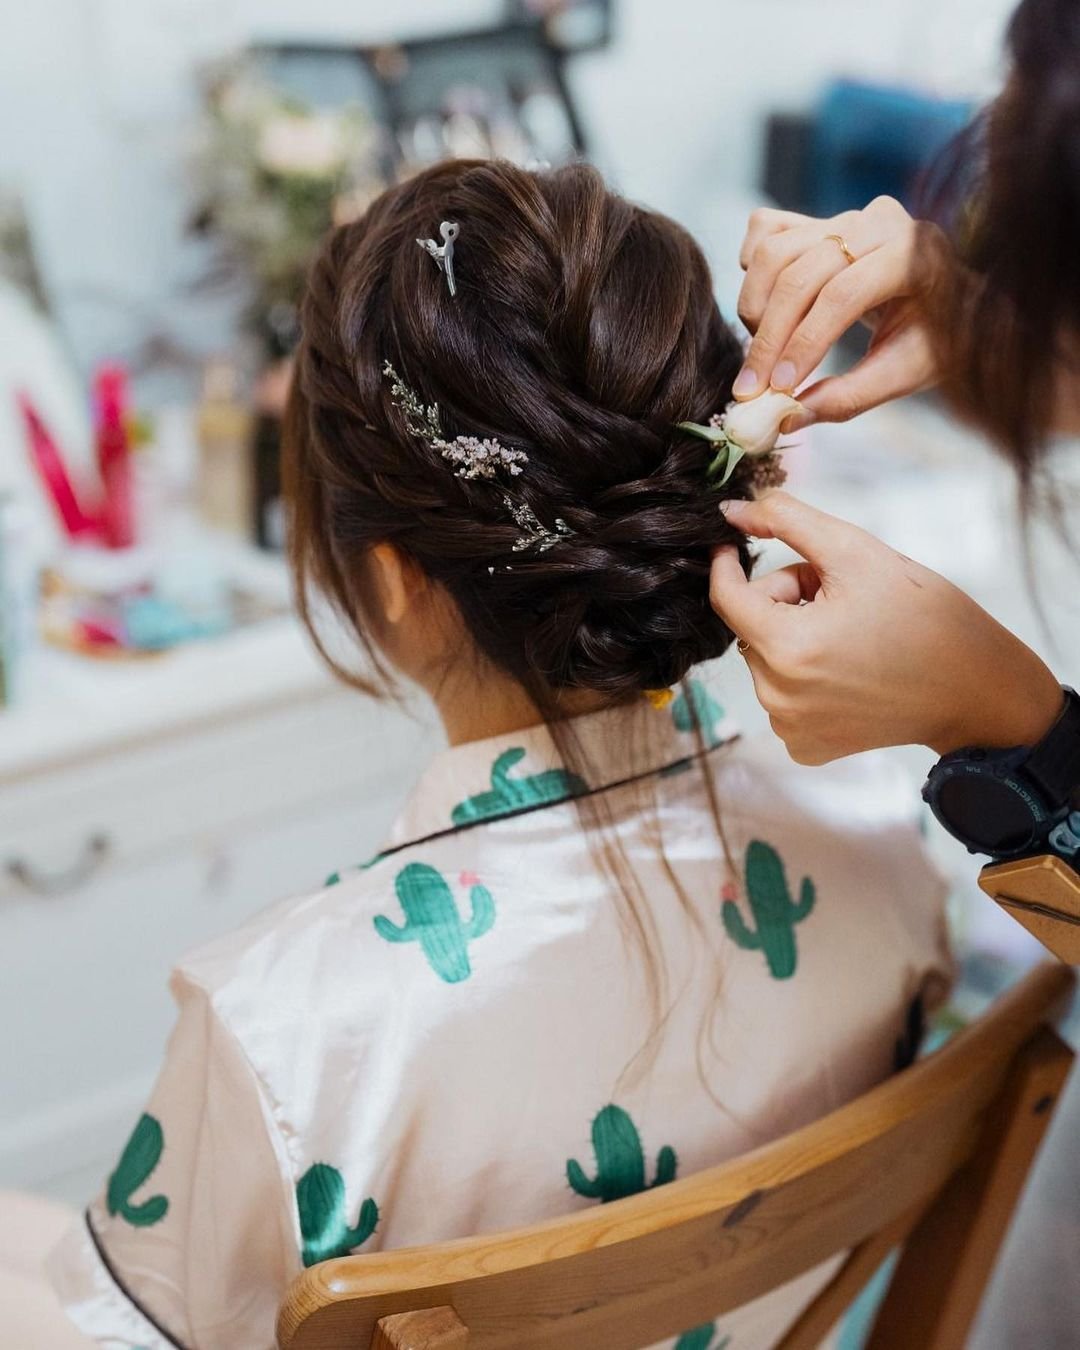 The most romantic bridal hairstyle to get an elegant look